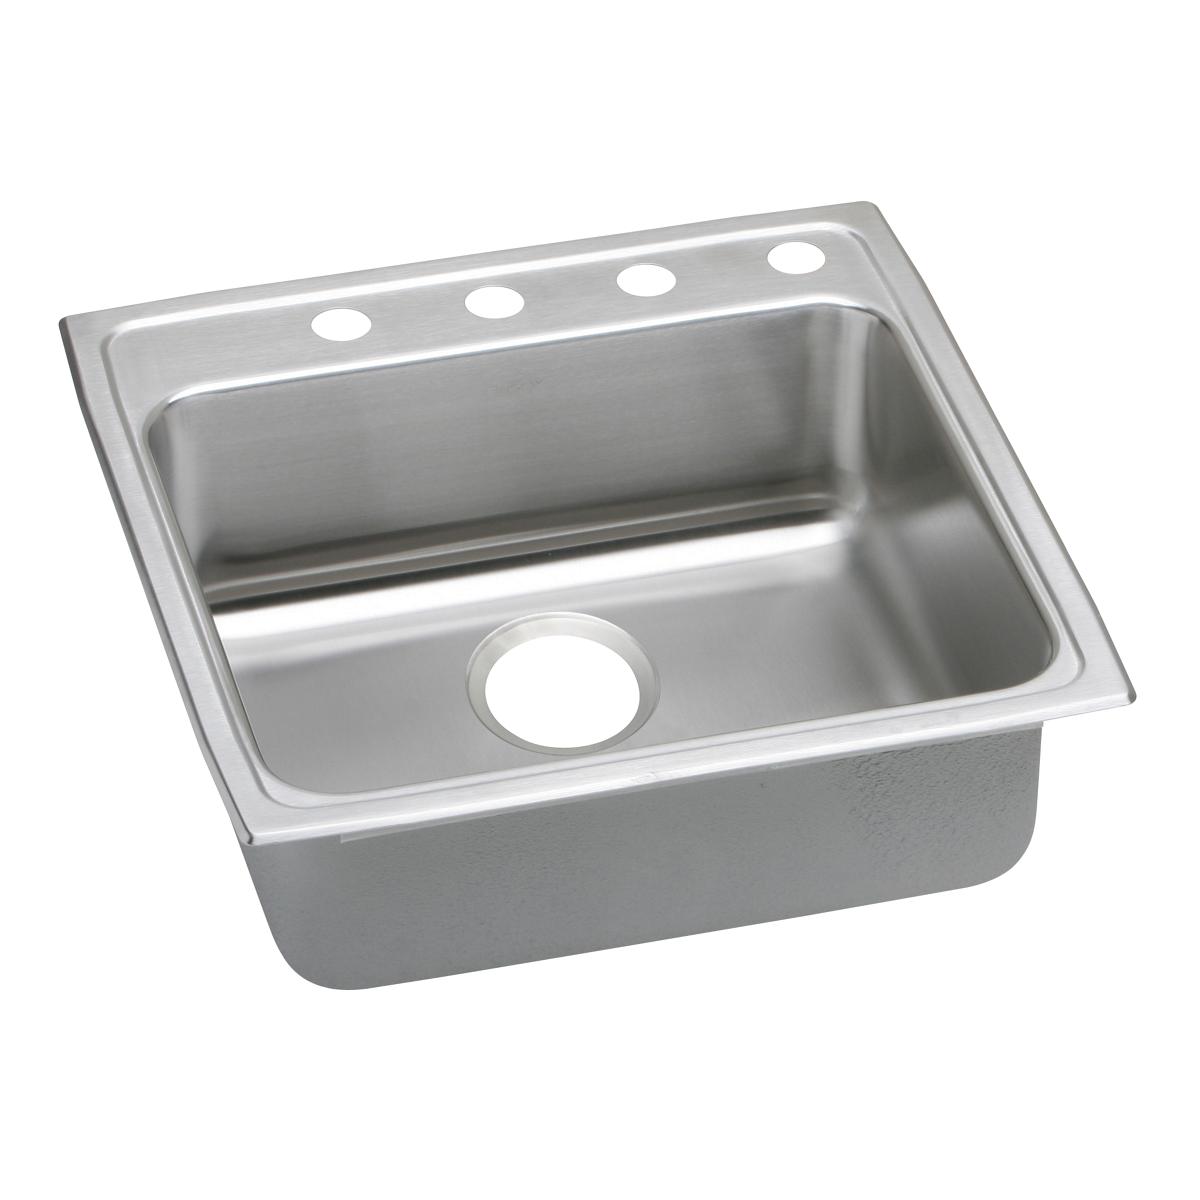 Elkay Lustertone Classic 22" x 22" x 5" MR2-Hole Single Bowl Drop-in ADA Sink with Quick-clip